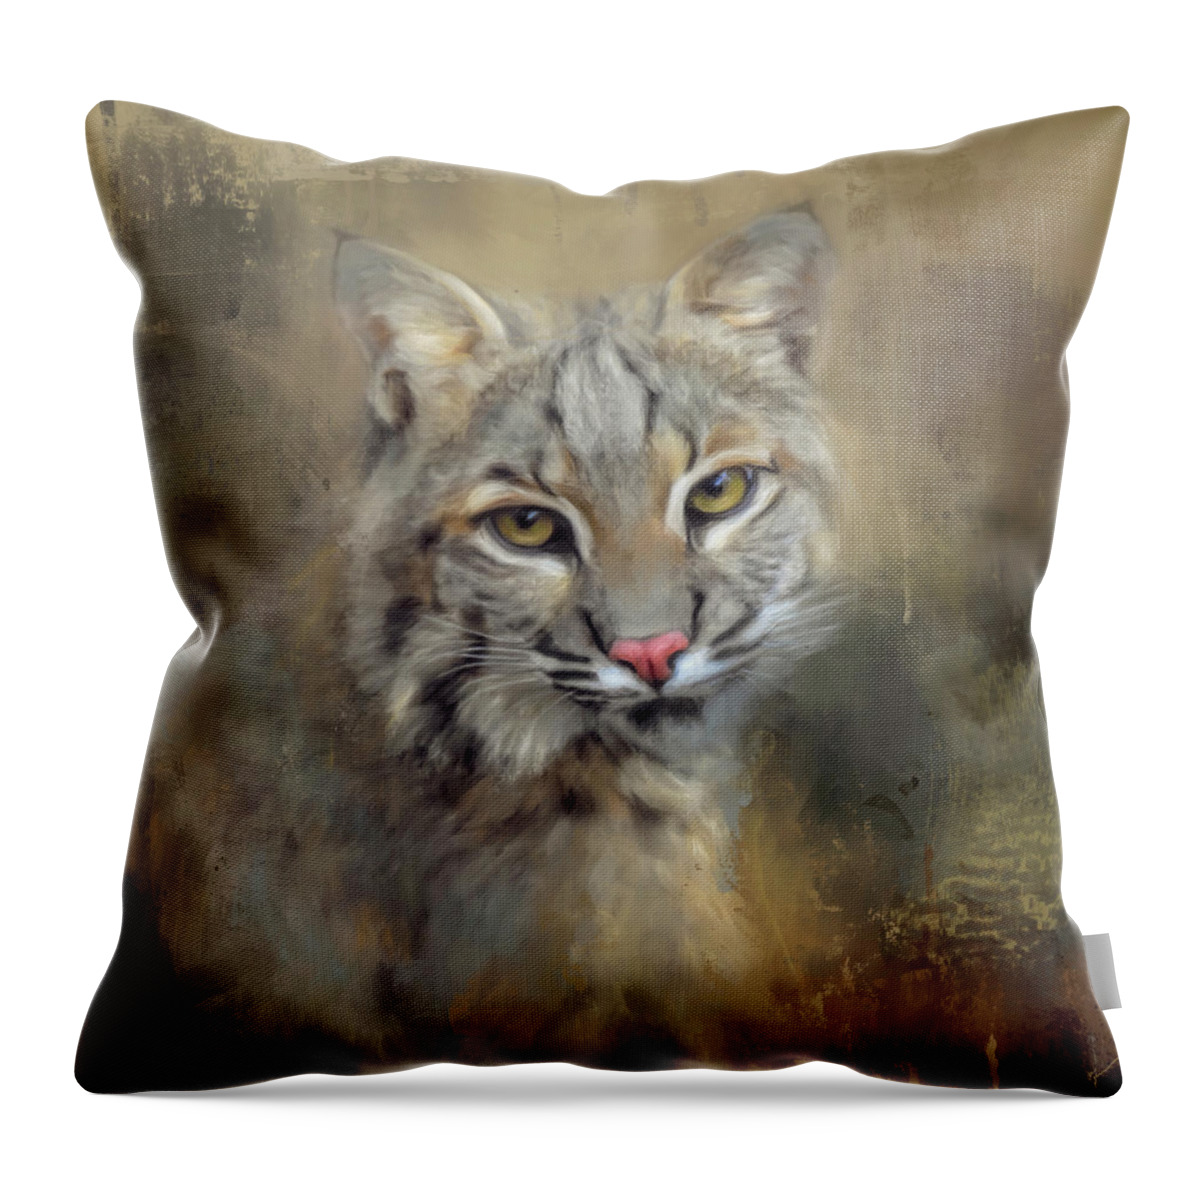 Colorful Throw Pillow featuring the painting Looking Back by Jai Johnson